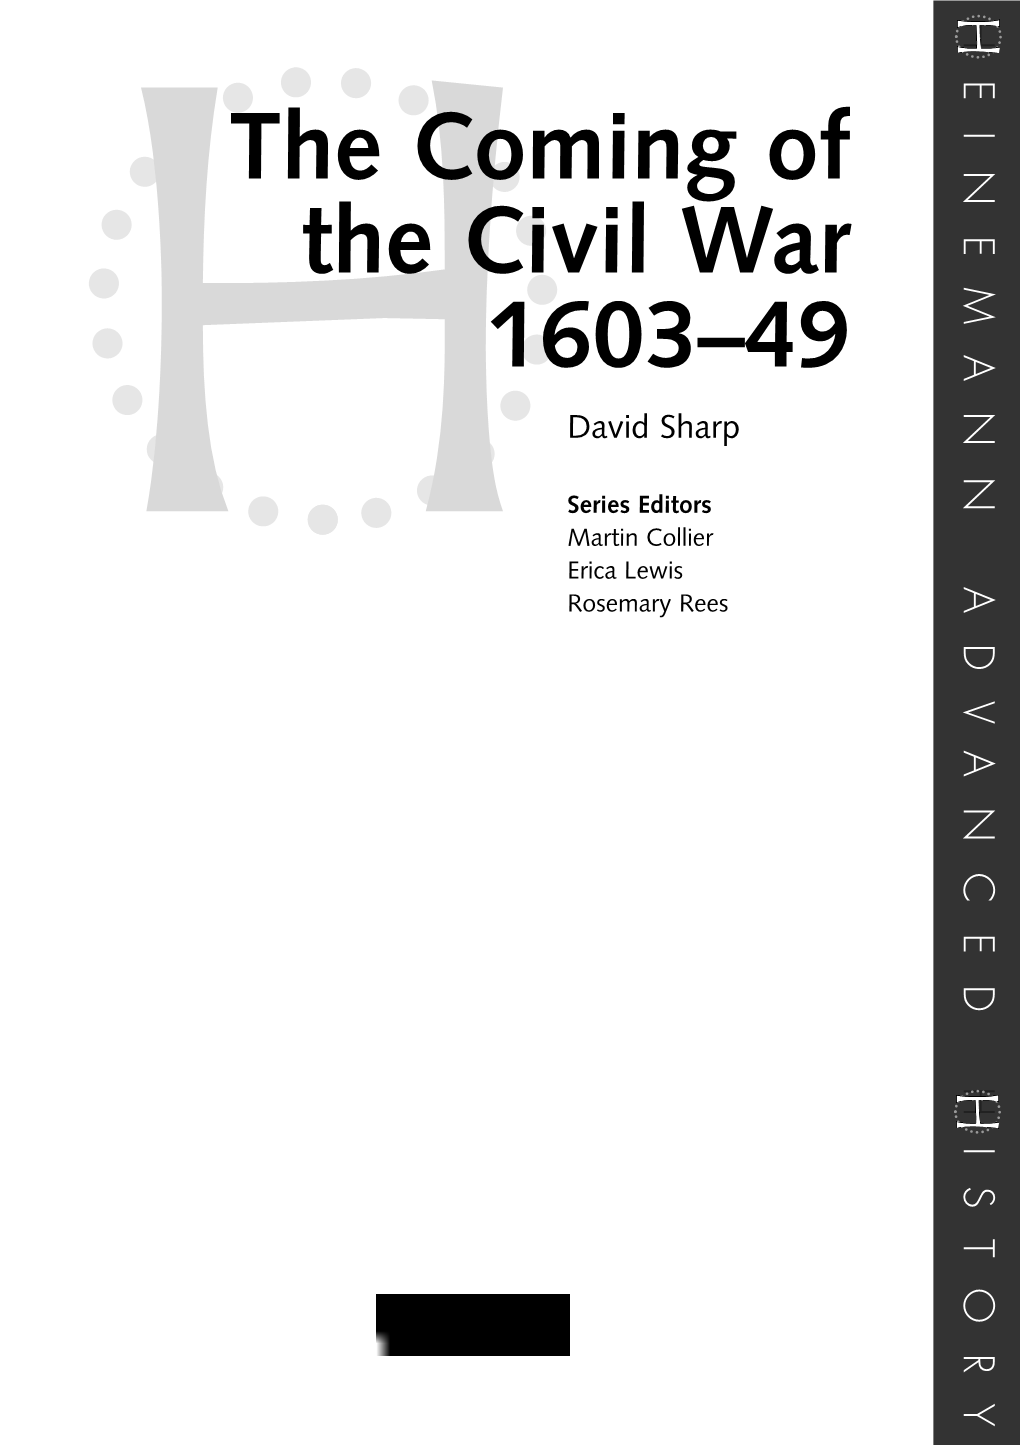 The Coming of the Civil War 1603-49